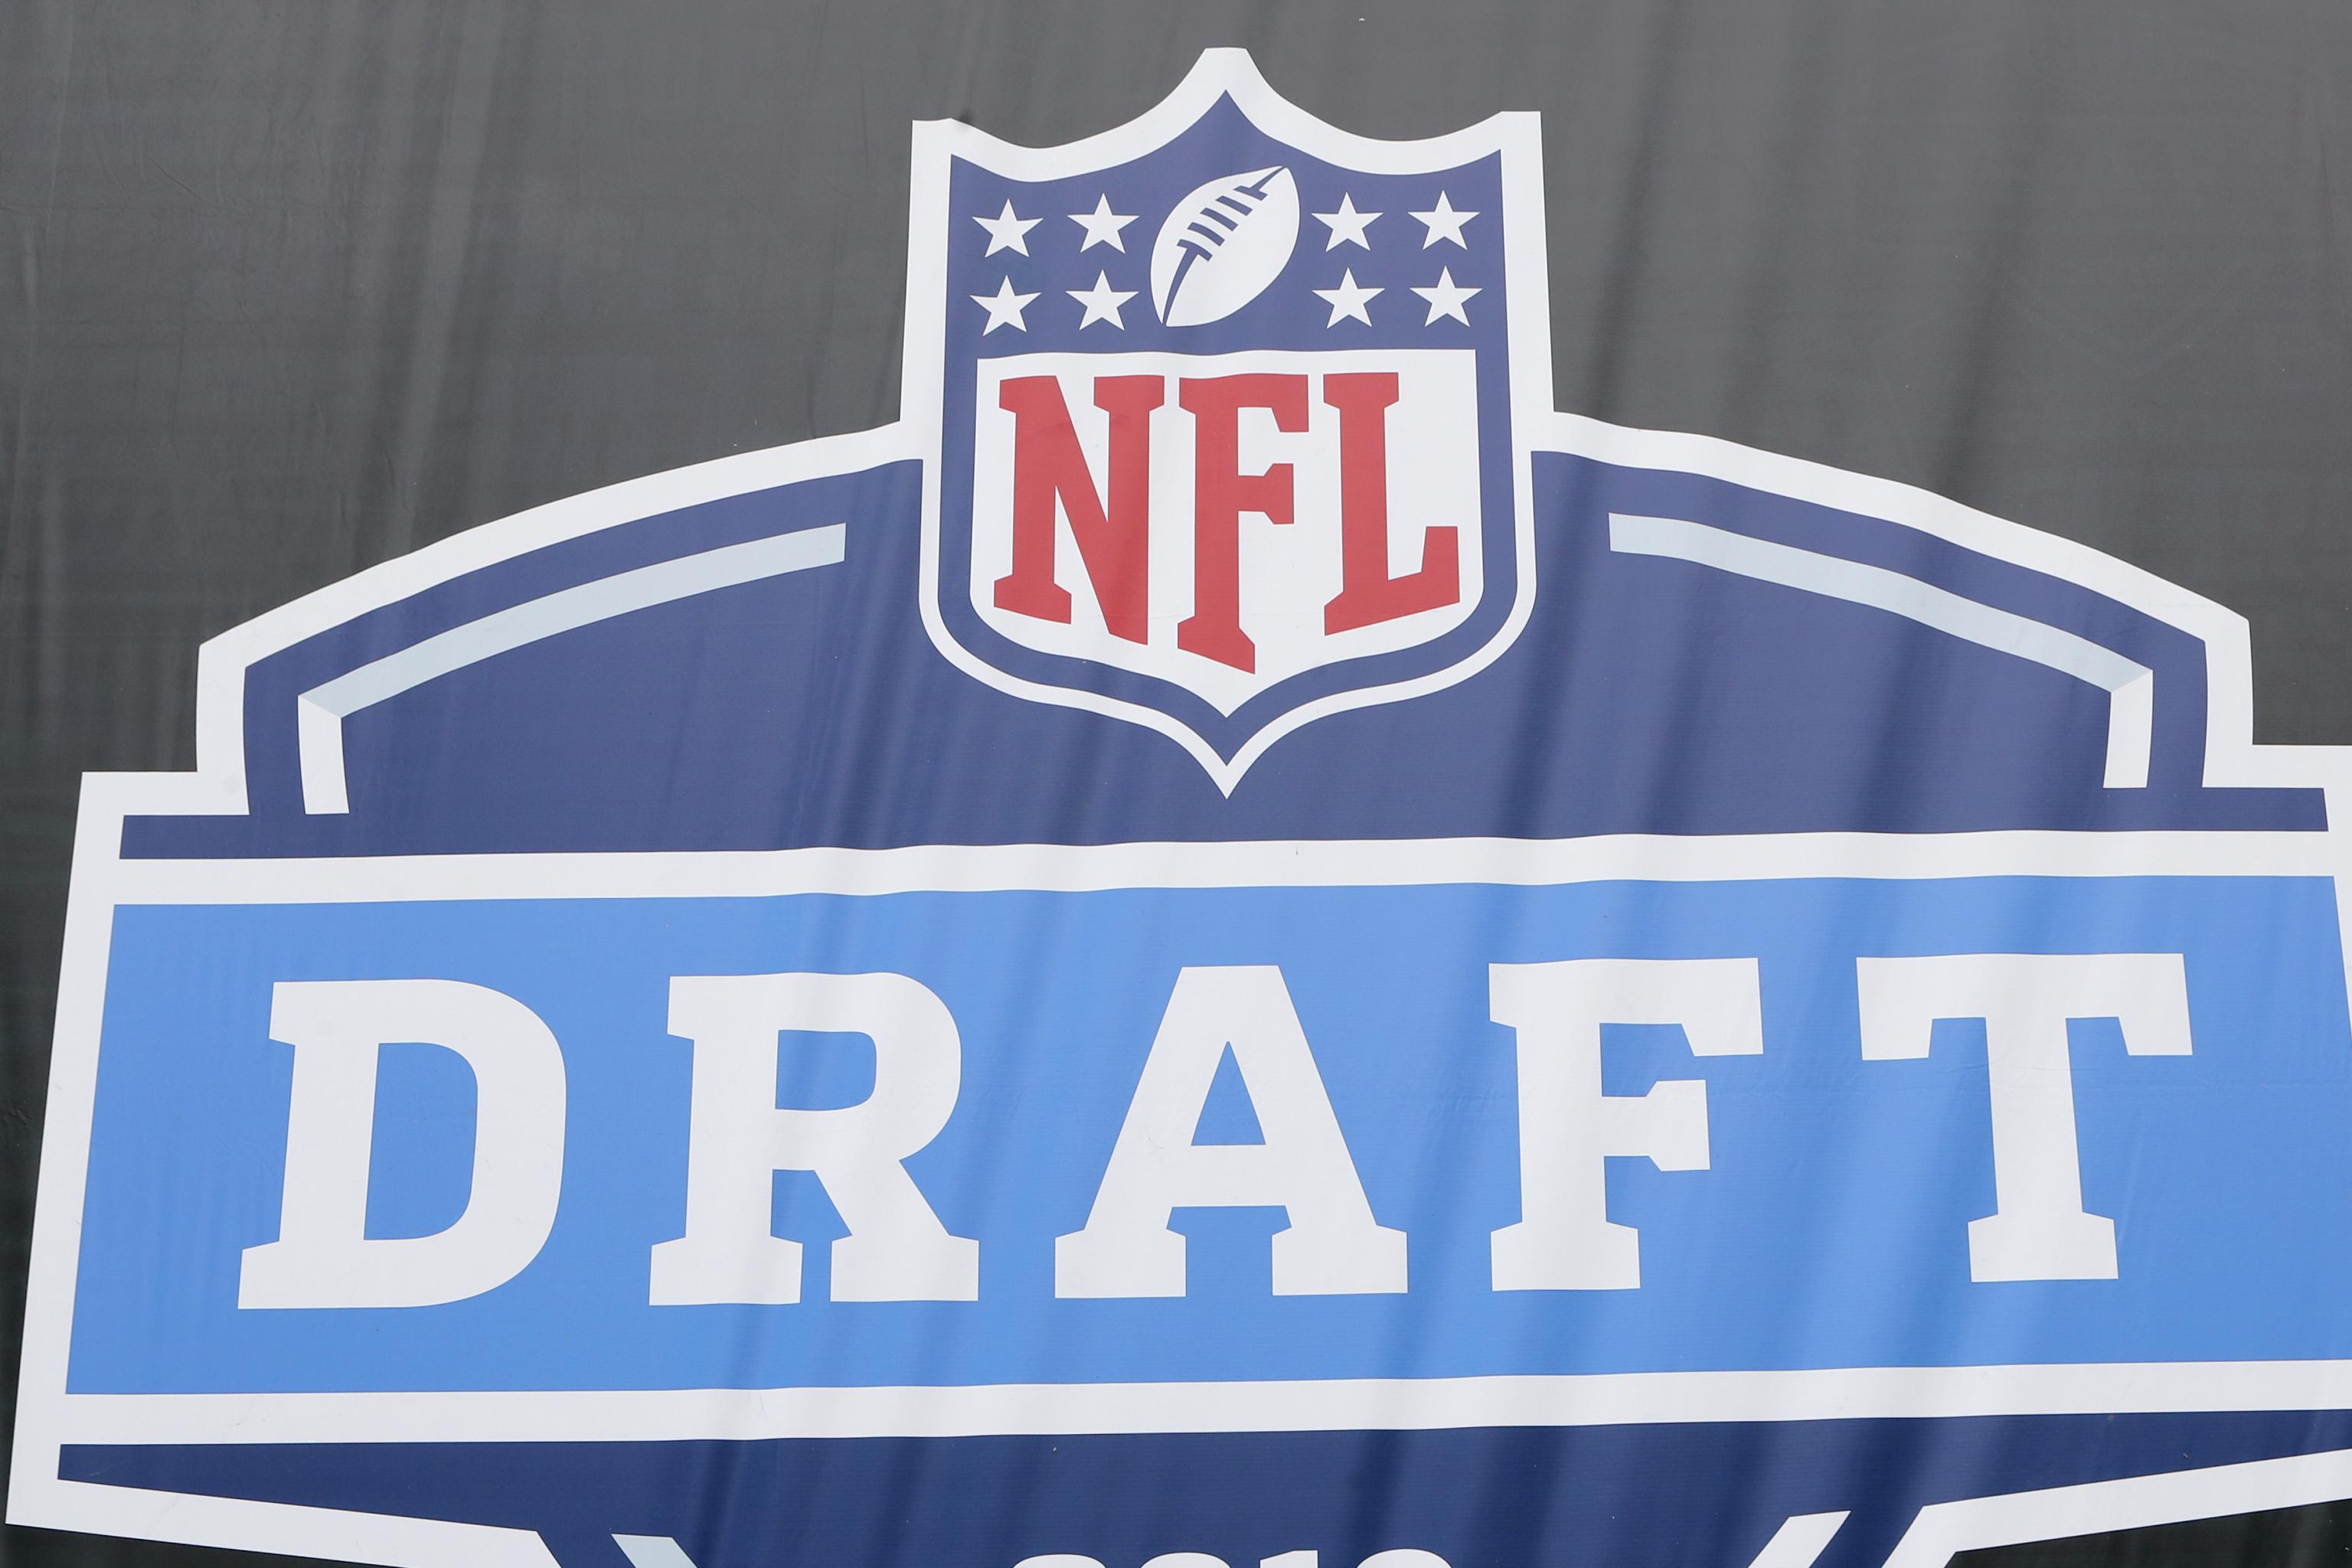 2021 NFL Draft order announced including compensatory picks - The